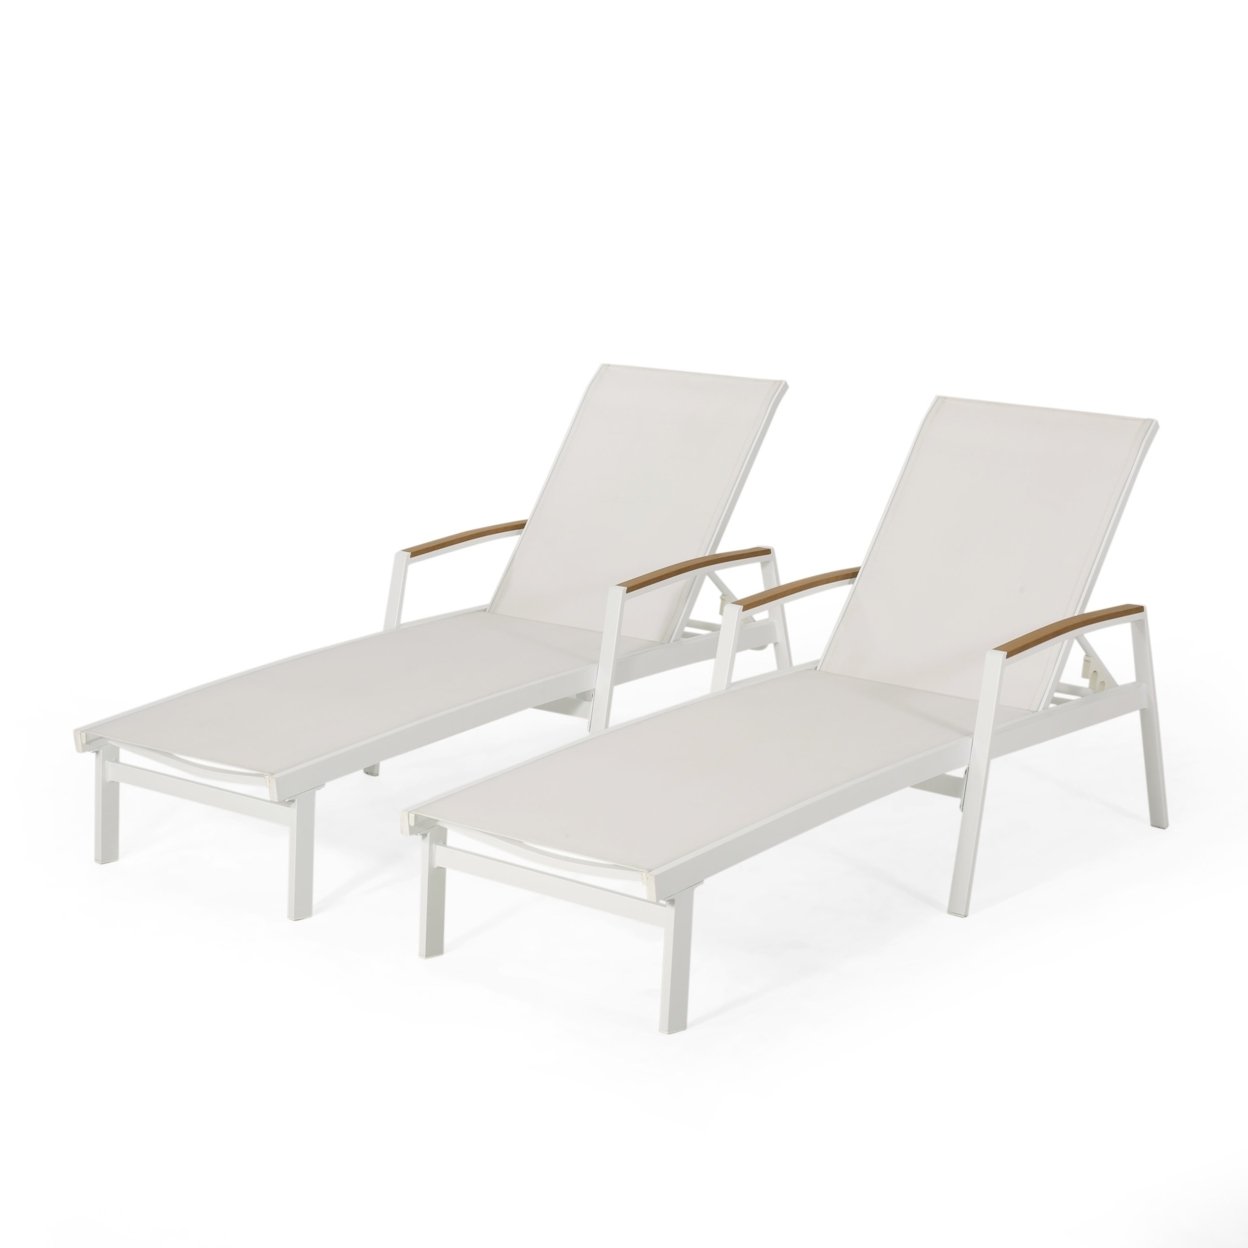 Joy Outdoor Aluminum Chaise Lounge With Mesh Seating (Set Of 2) - White